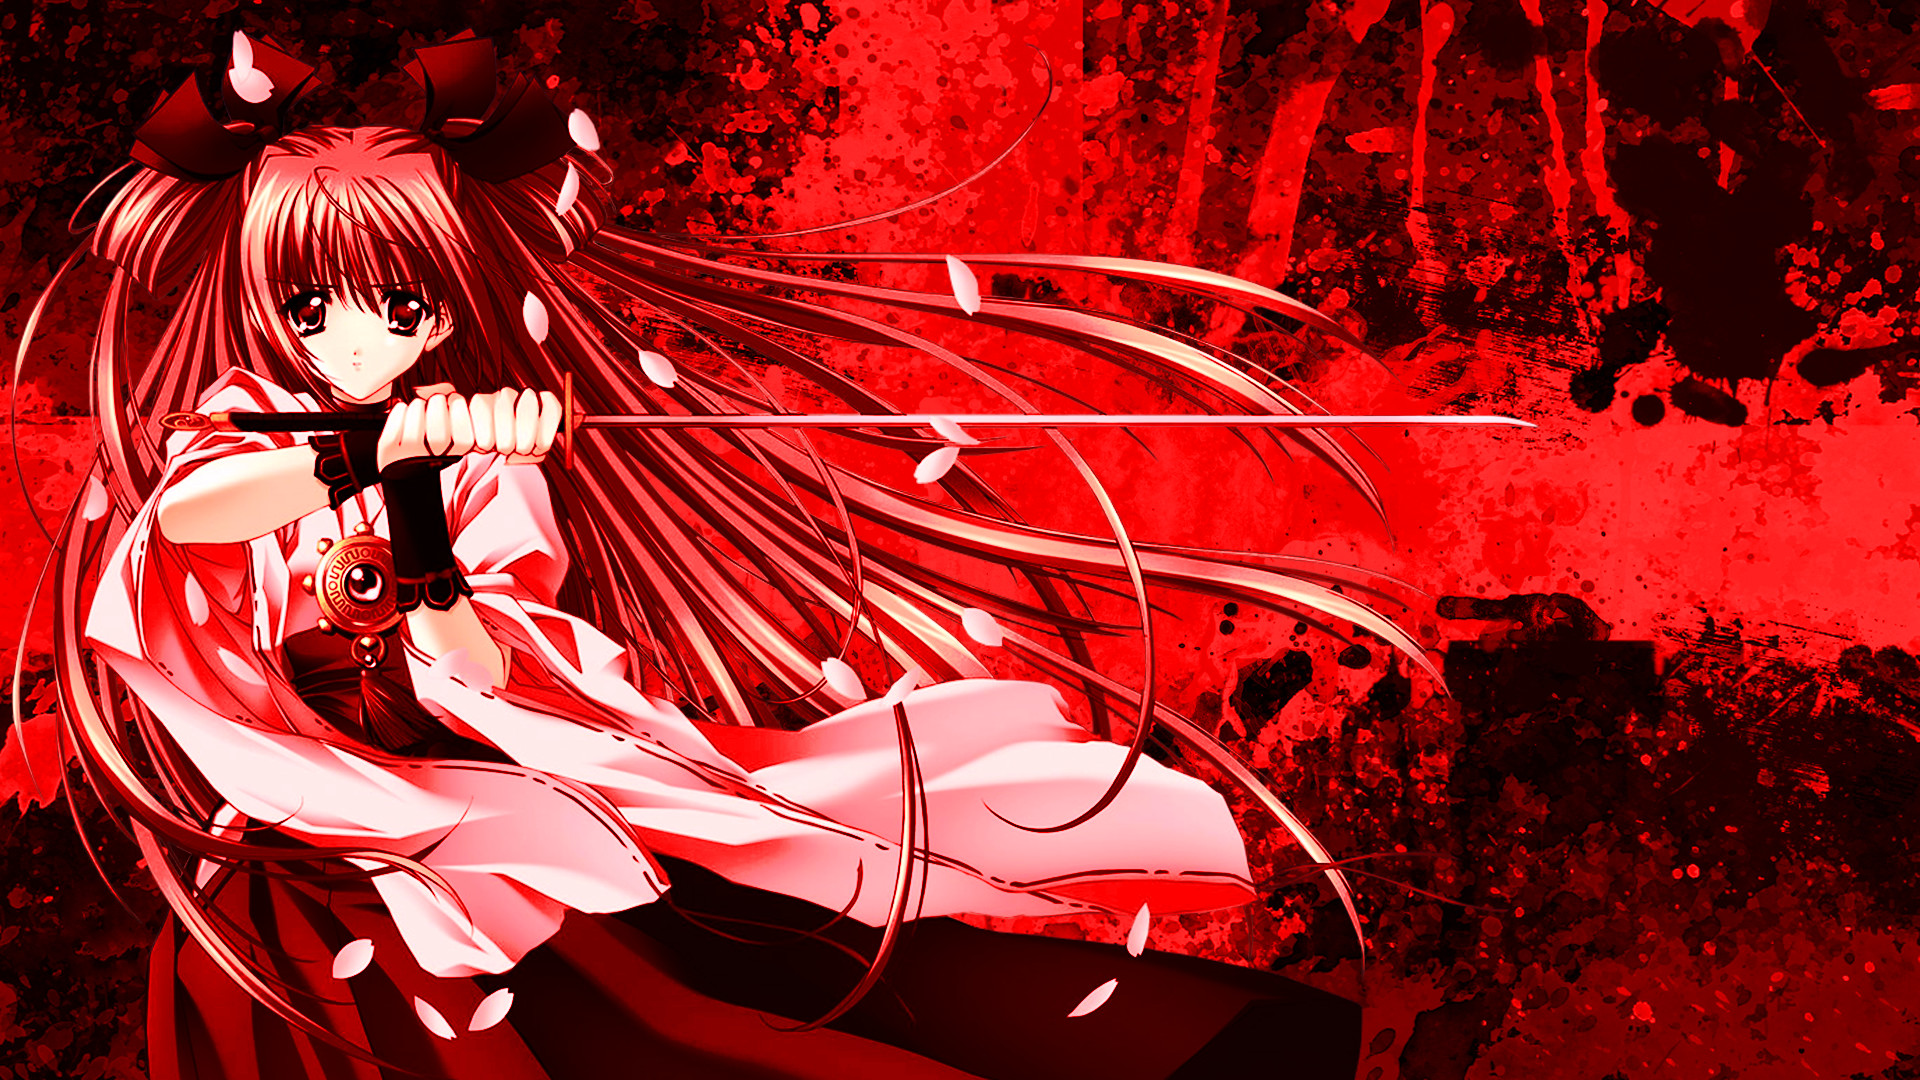 Anime – Unknown Woman Warrior Sword Red Eyes Red Hair Long Hair Anime Girl  Wallpaper